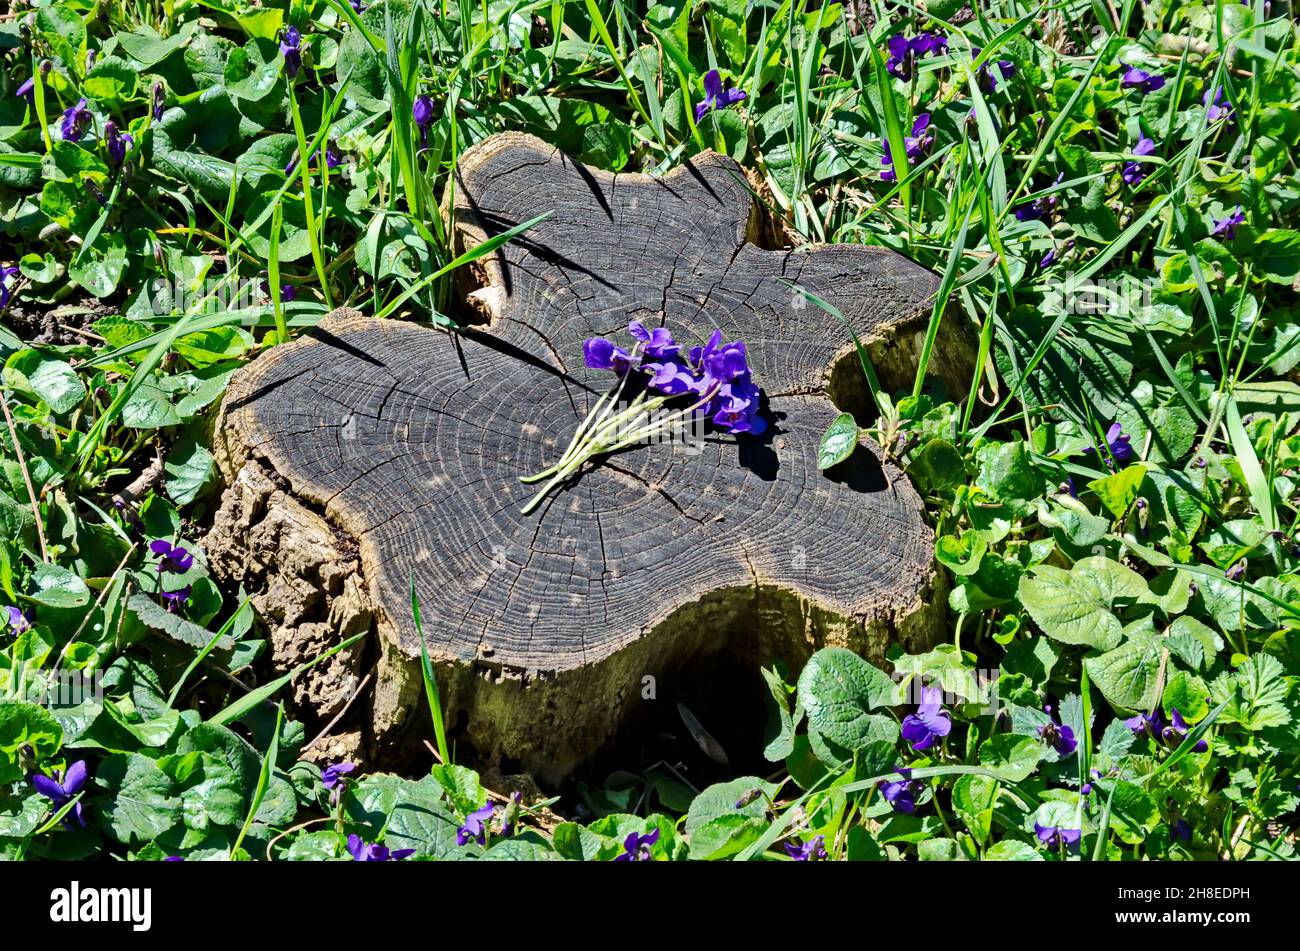 Bouquet of purple field violets on a part of a cut log with annual circles, Sofia, Bulgaria Stock Photo